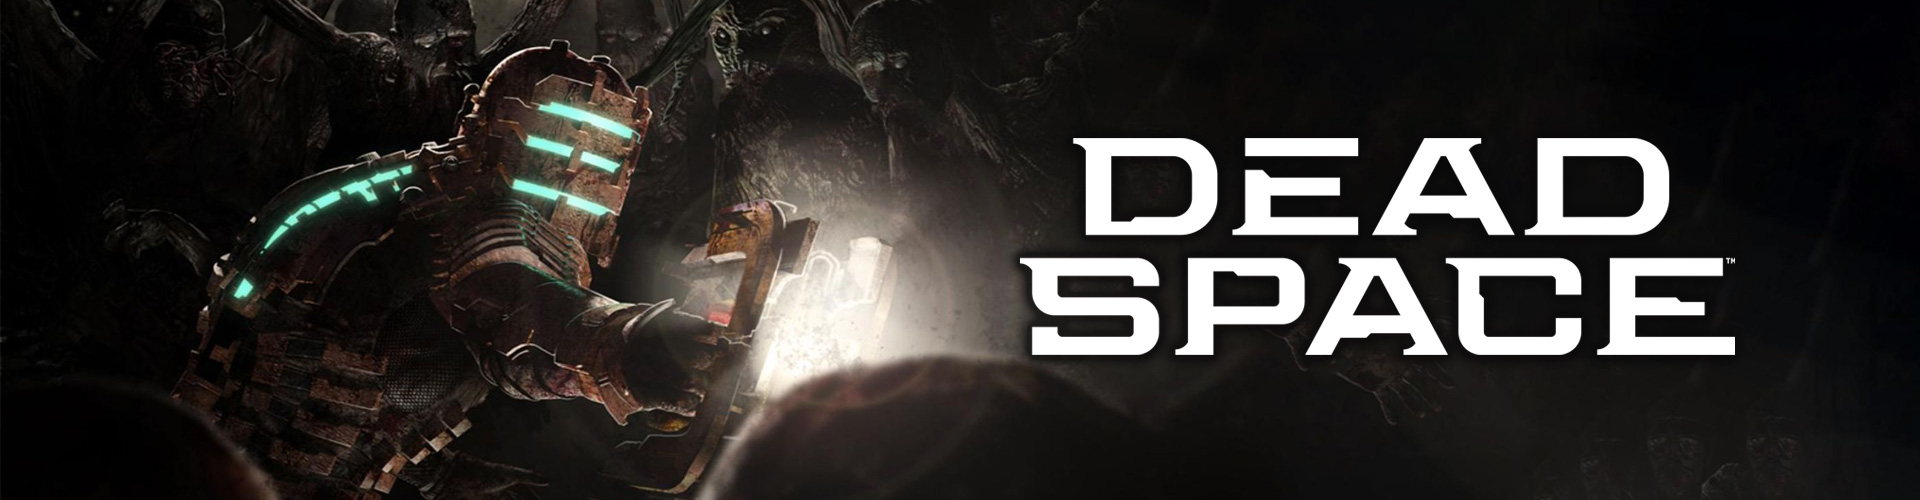 Dead Space is een third-person sci-fi survival horror game